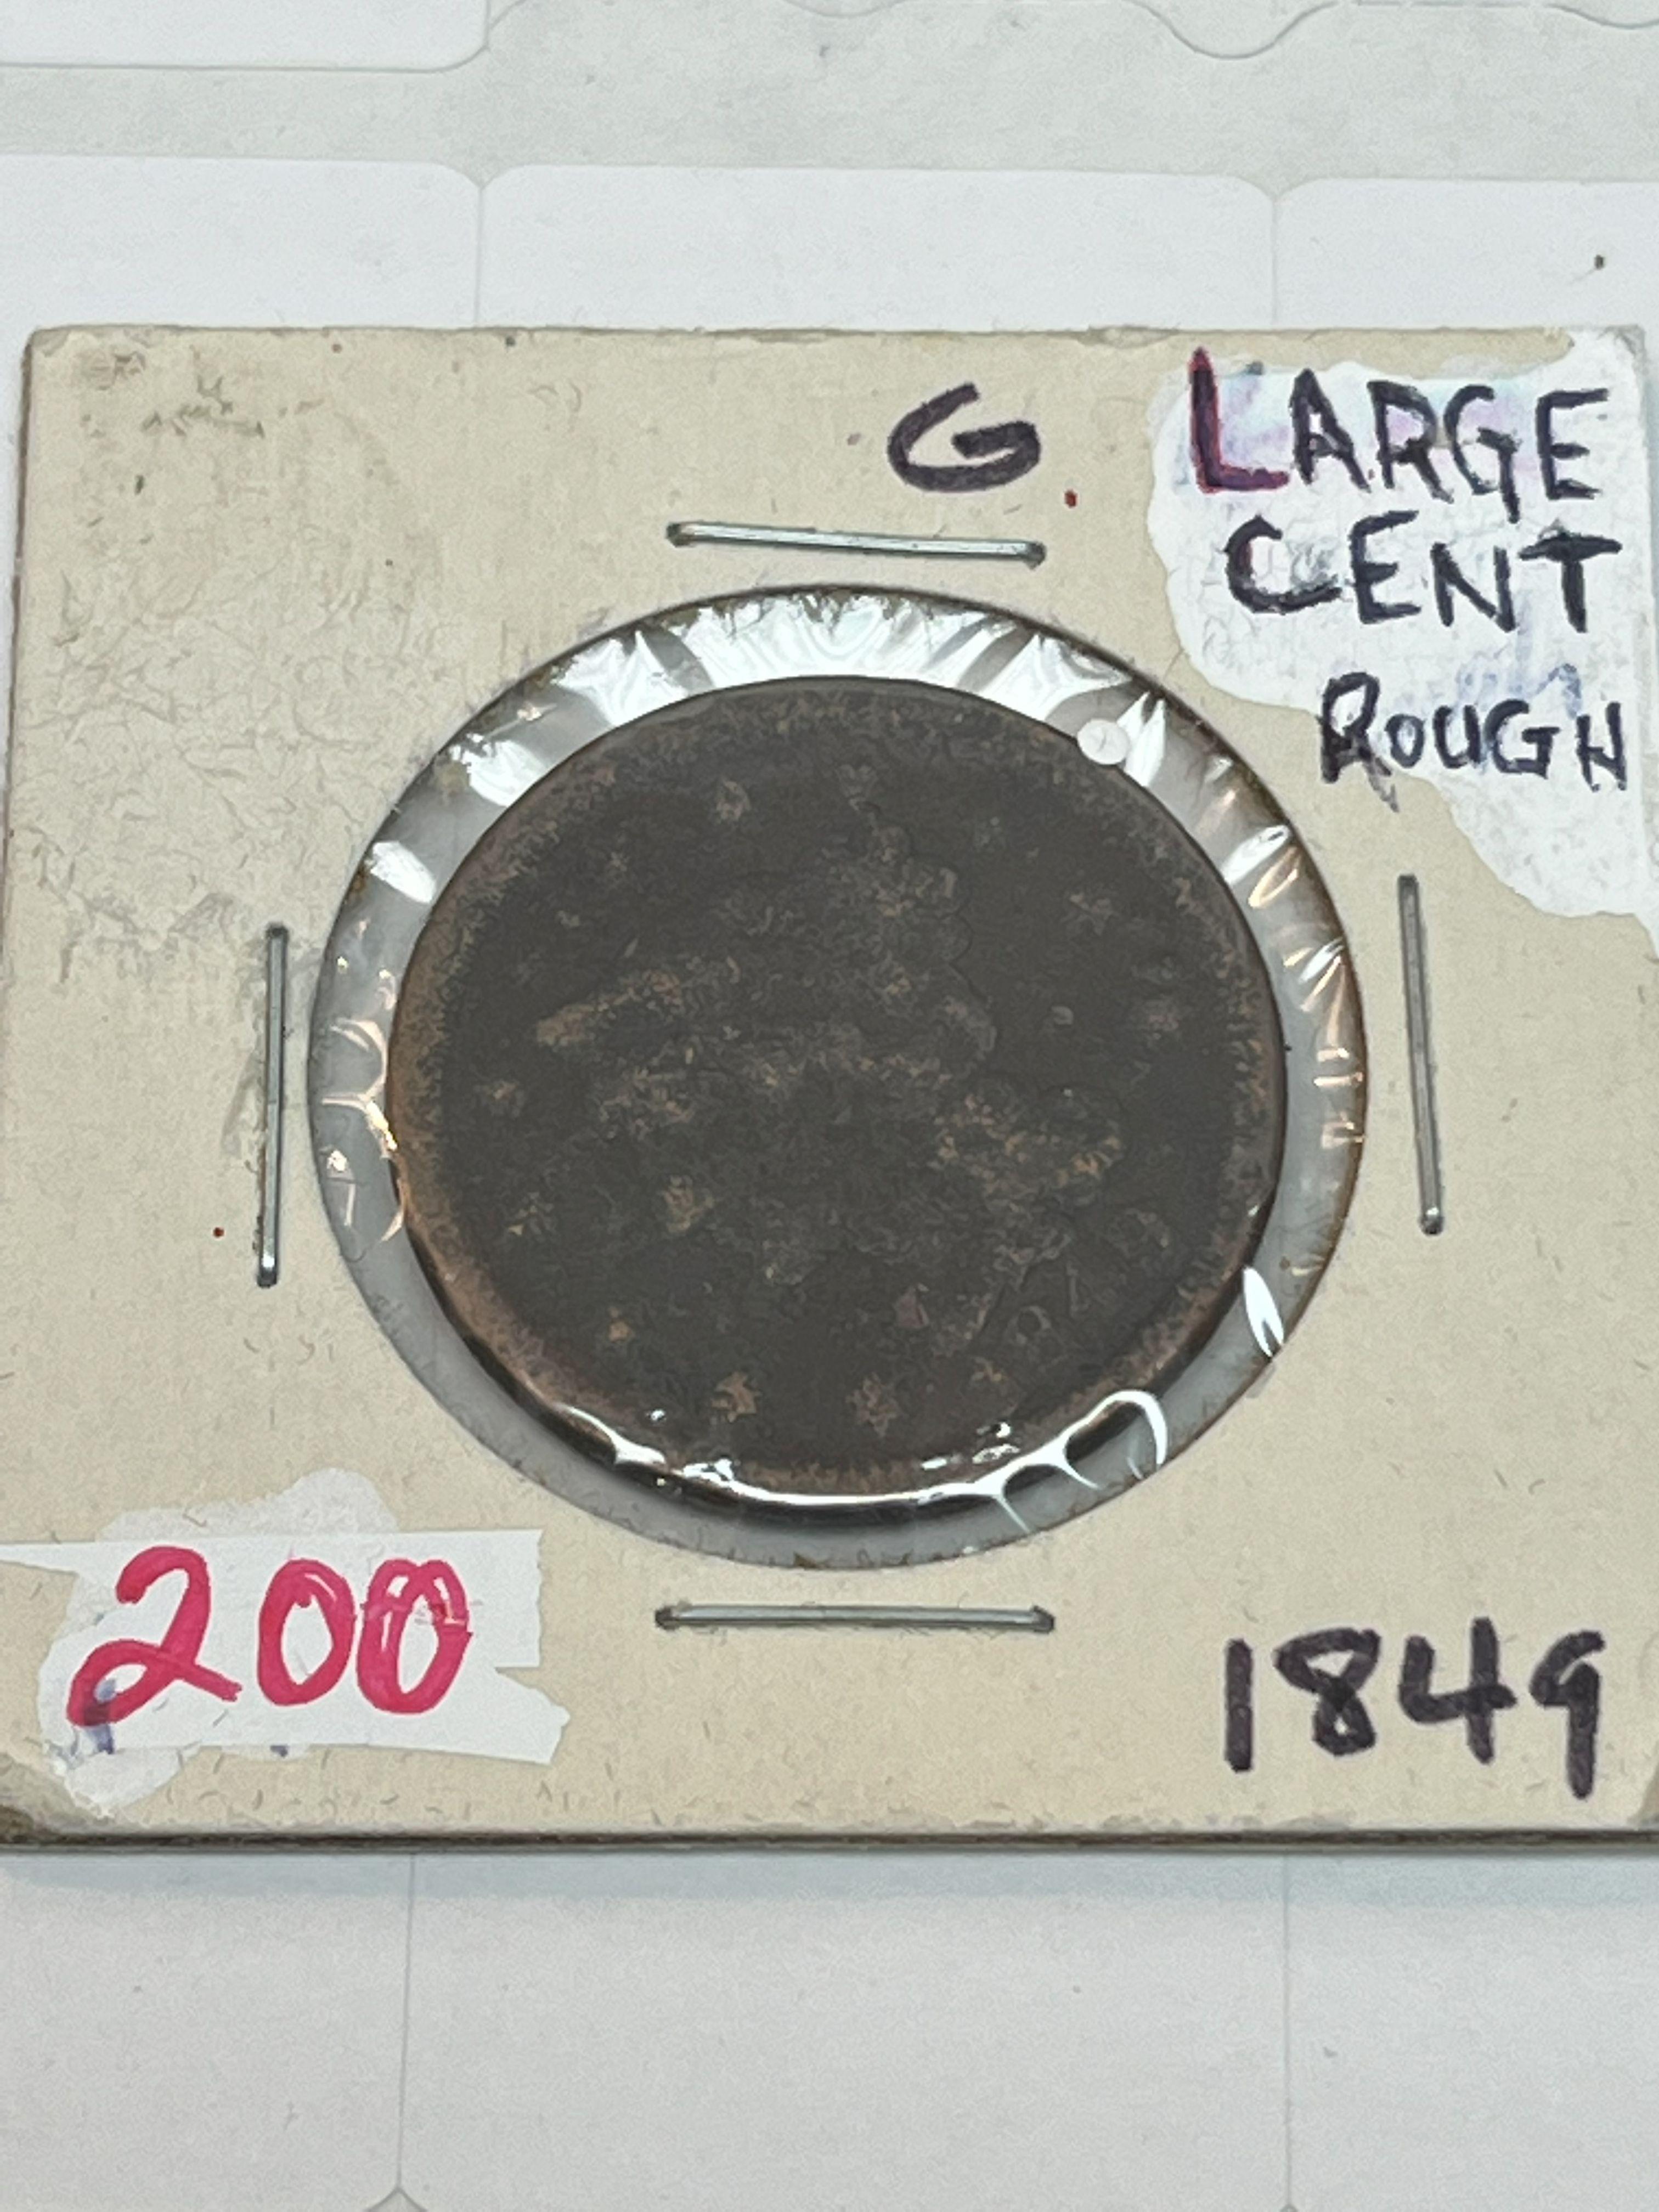 1849 Large Cent Readable Date - Rough